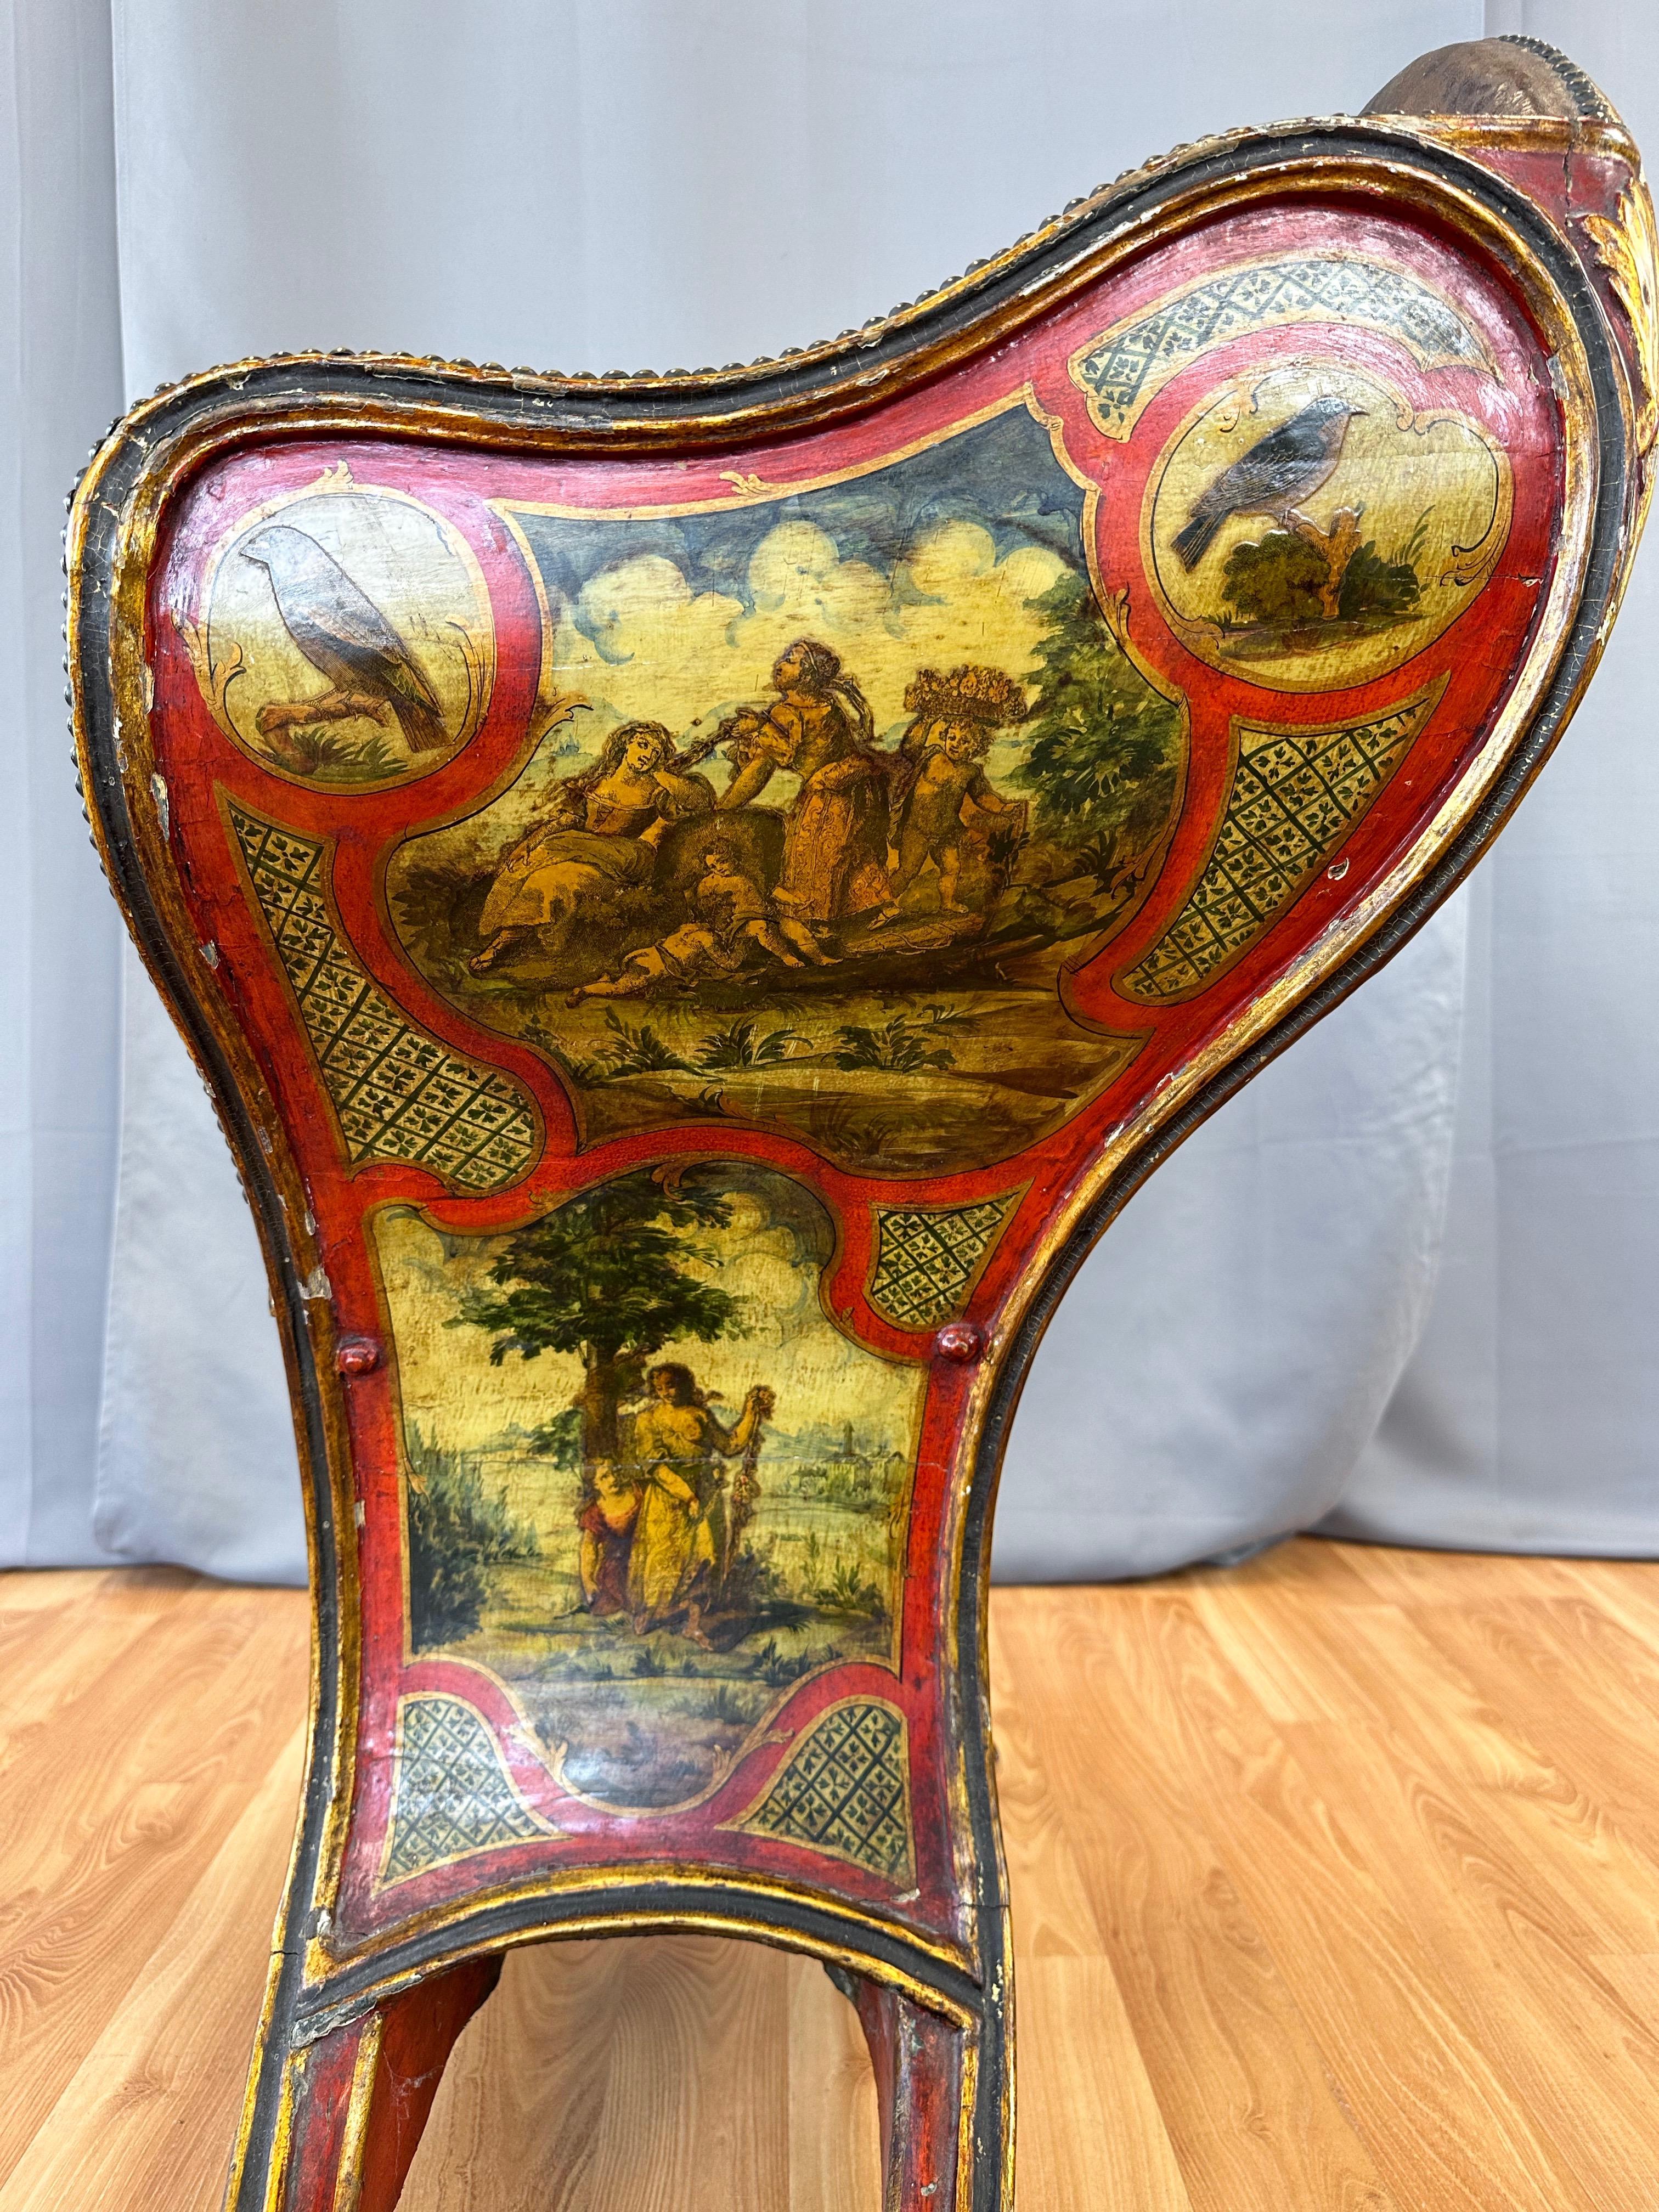 Venetian Illustrated, Polychrome, Gilt, and Leather Gondola Chair, c. 1820 For Sale 4